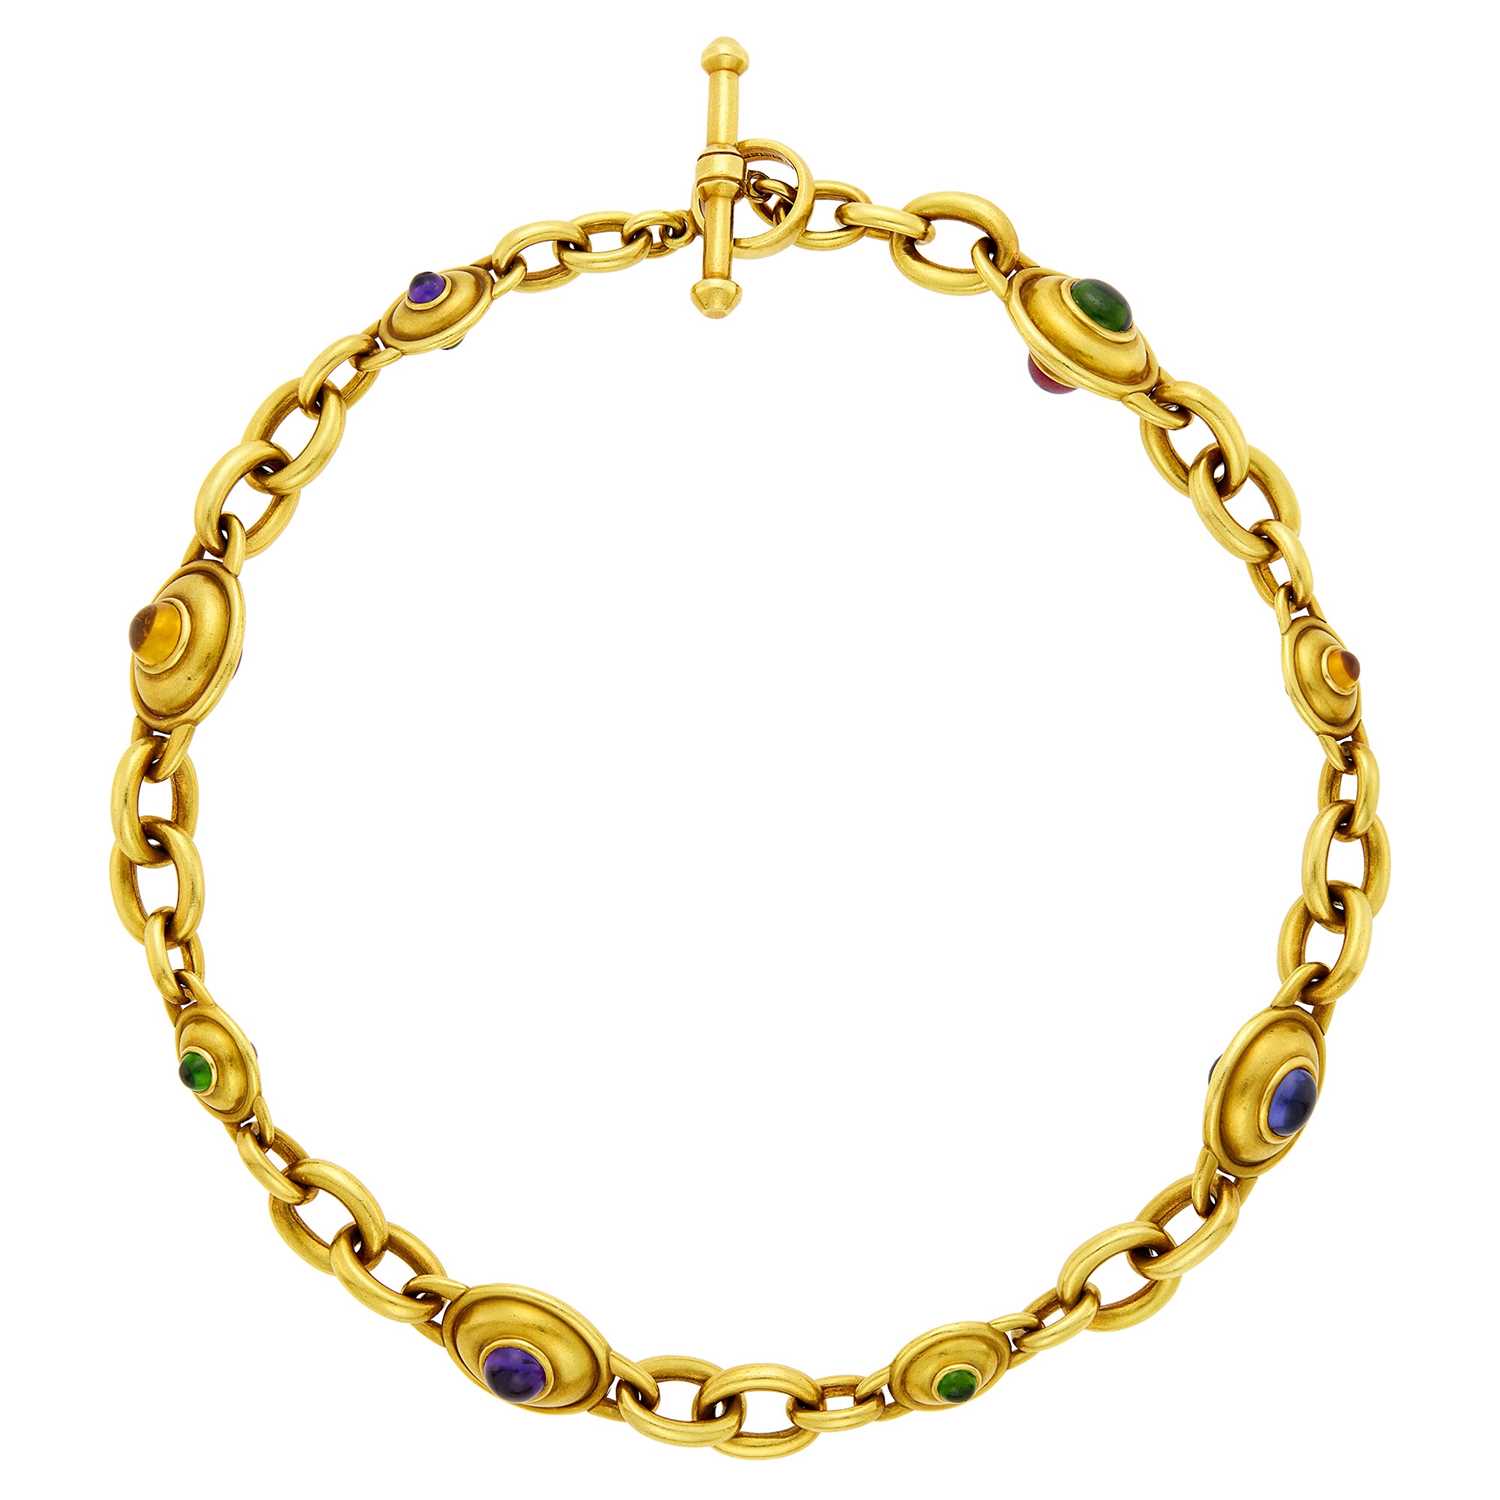 Lot 1182 - Barry Kieselstein-Cord Gold and Cabochon Colored Stone Link Toggle Necklace